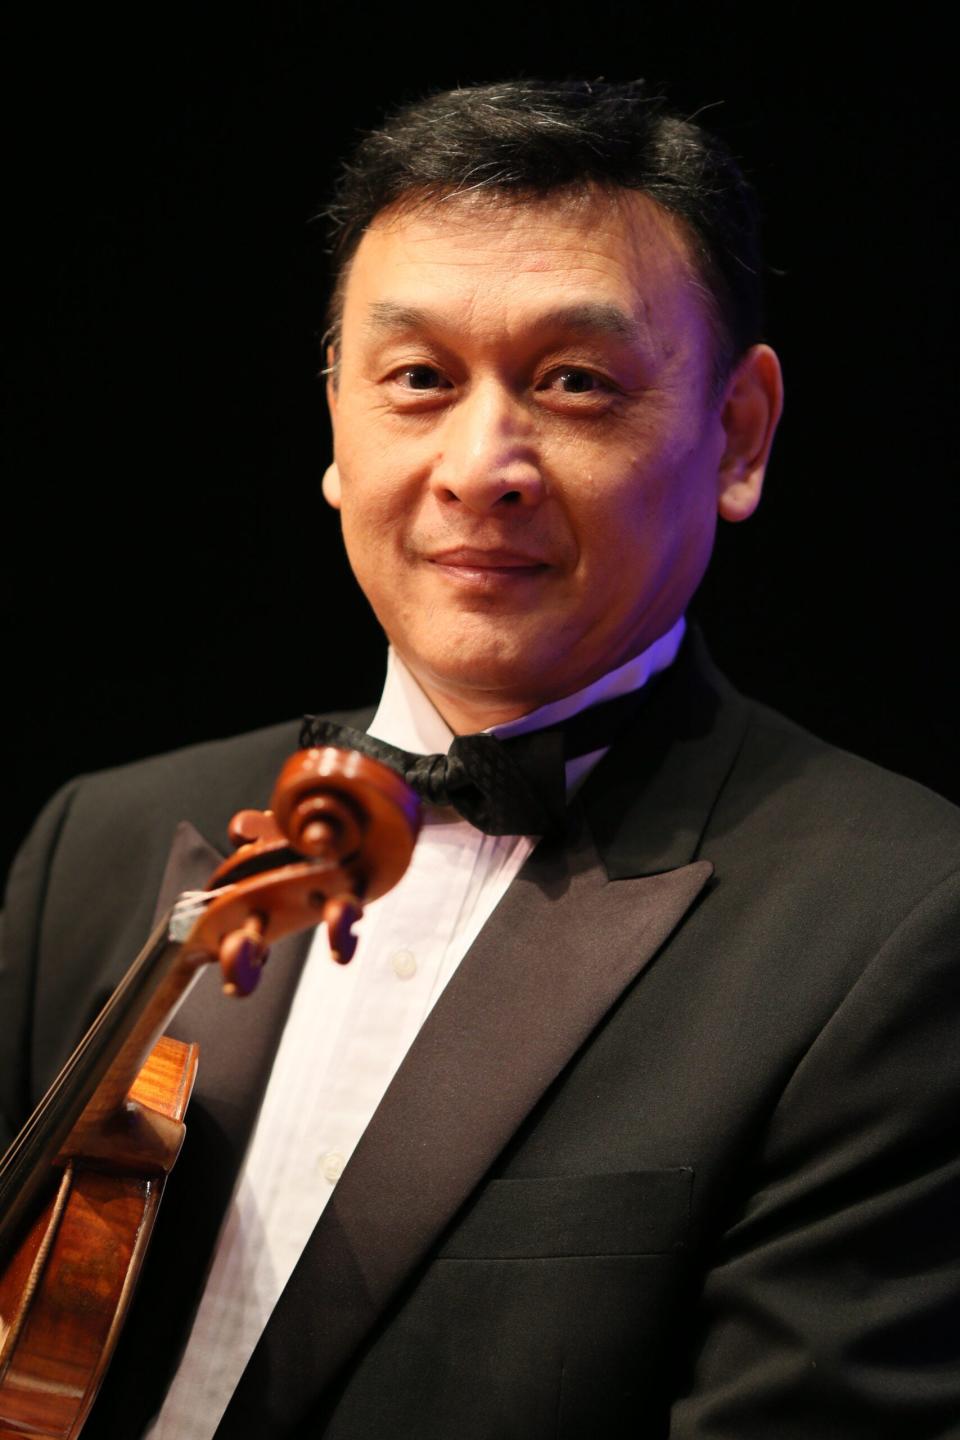 Ming Gao, concertmaster for the Punta Gorda Symphony, will be a guest soloist for Felix Mendelssohn’s Violin Concerto.